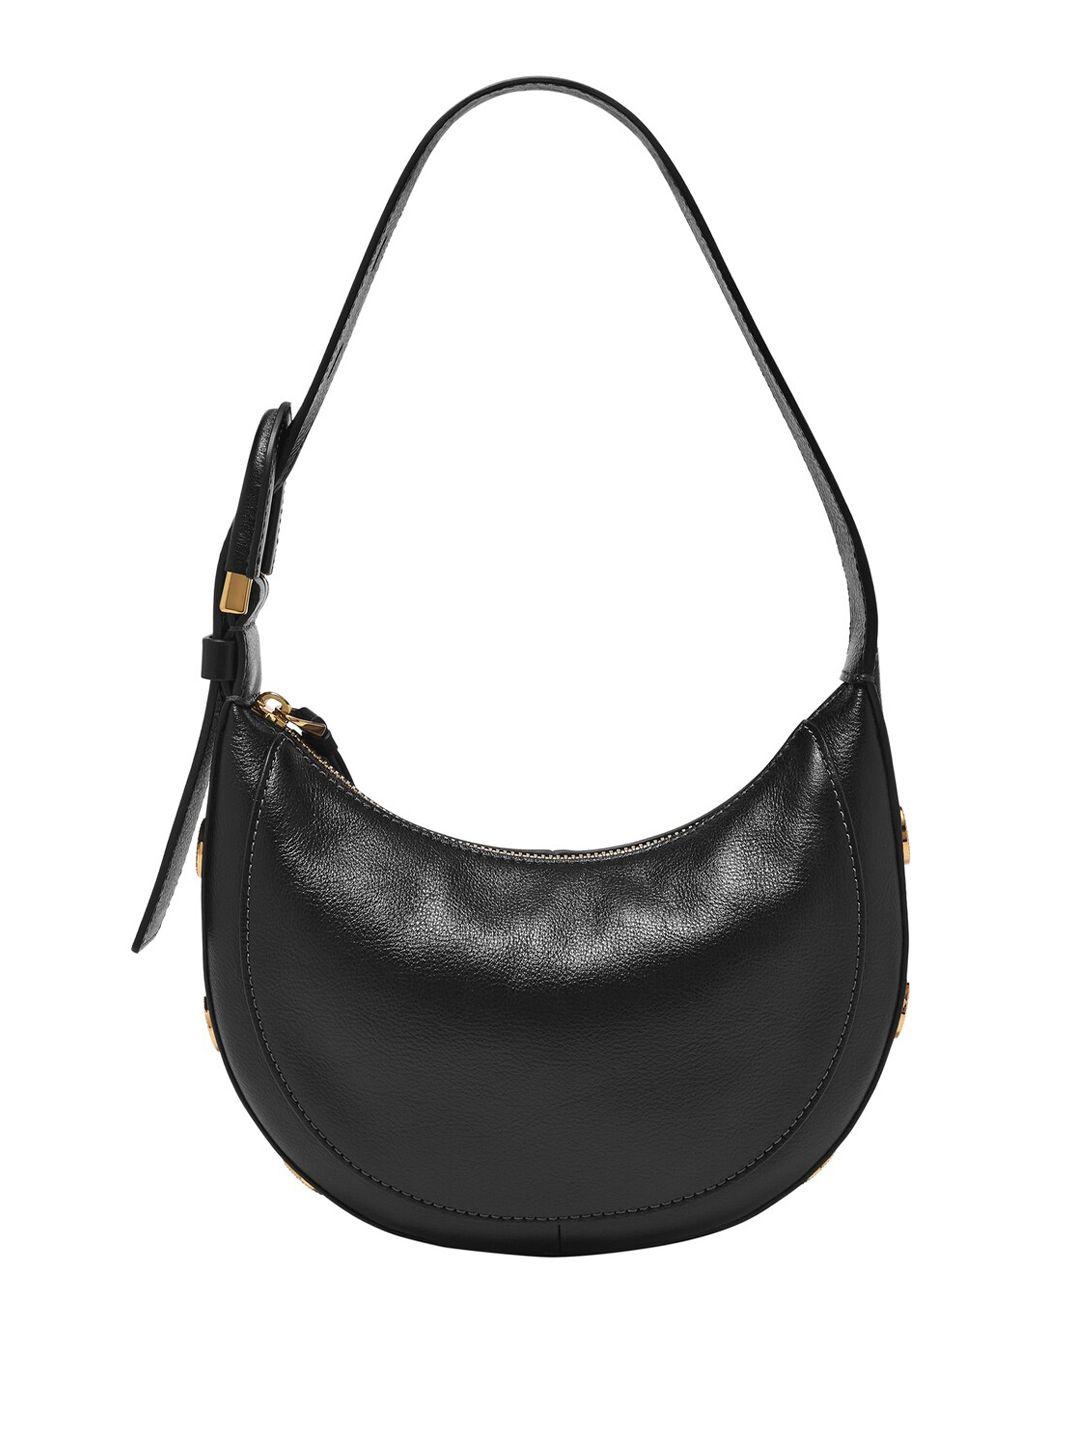 fossil textured leather half moon structured hobo bag